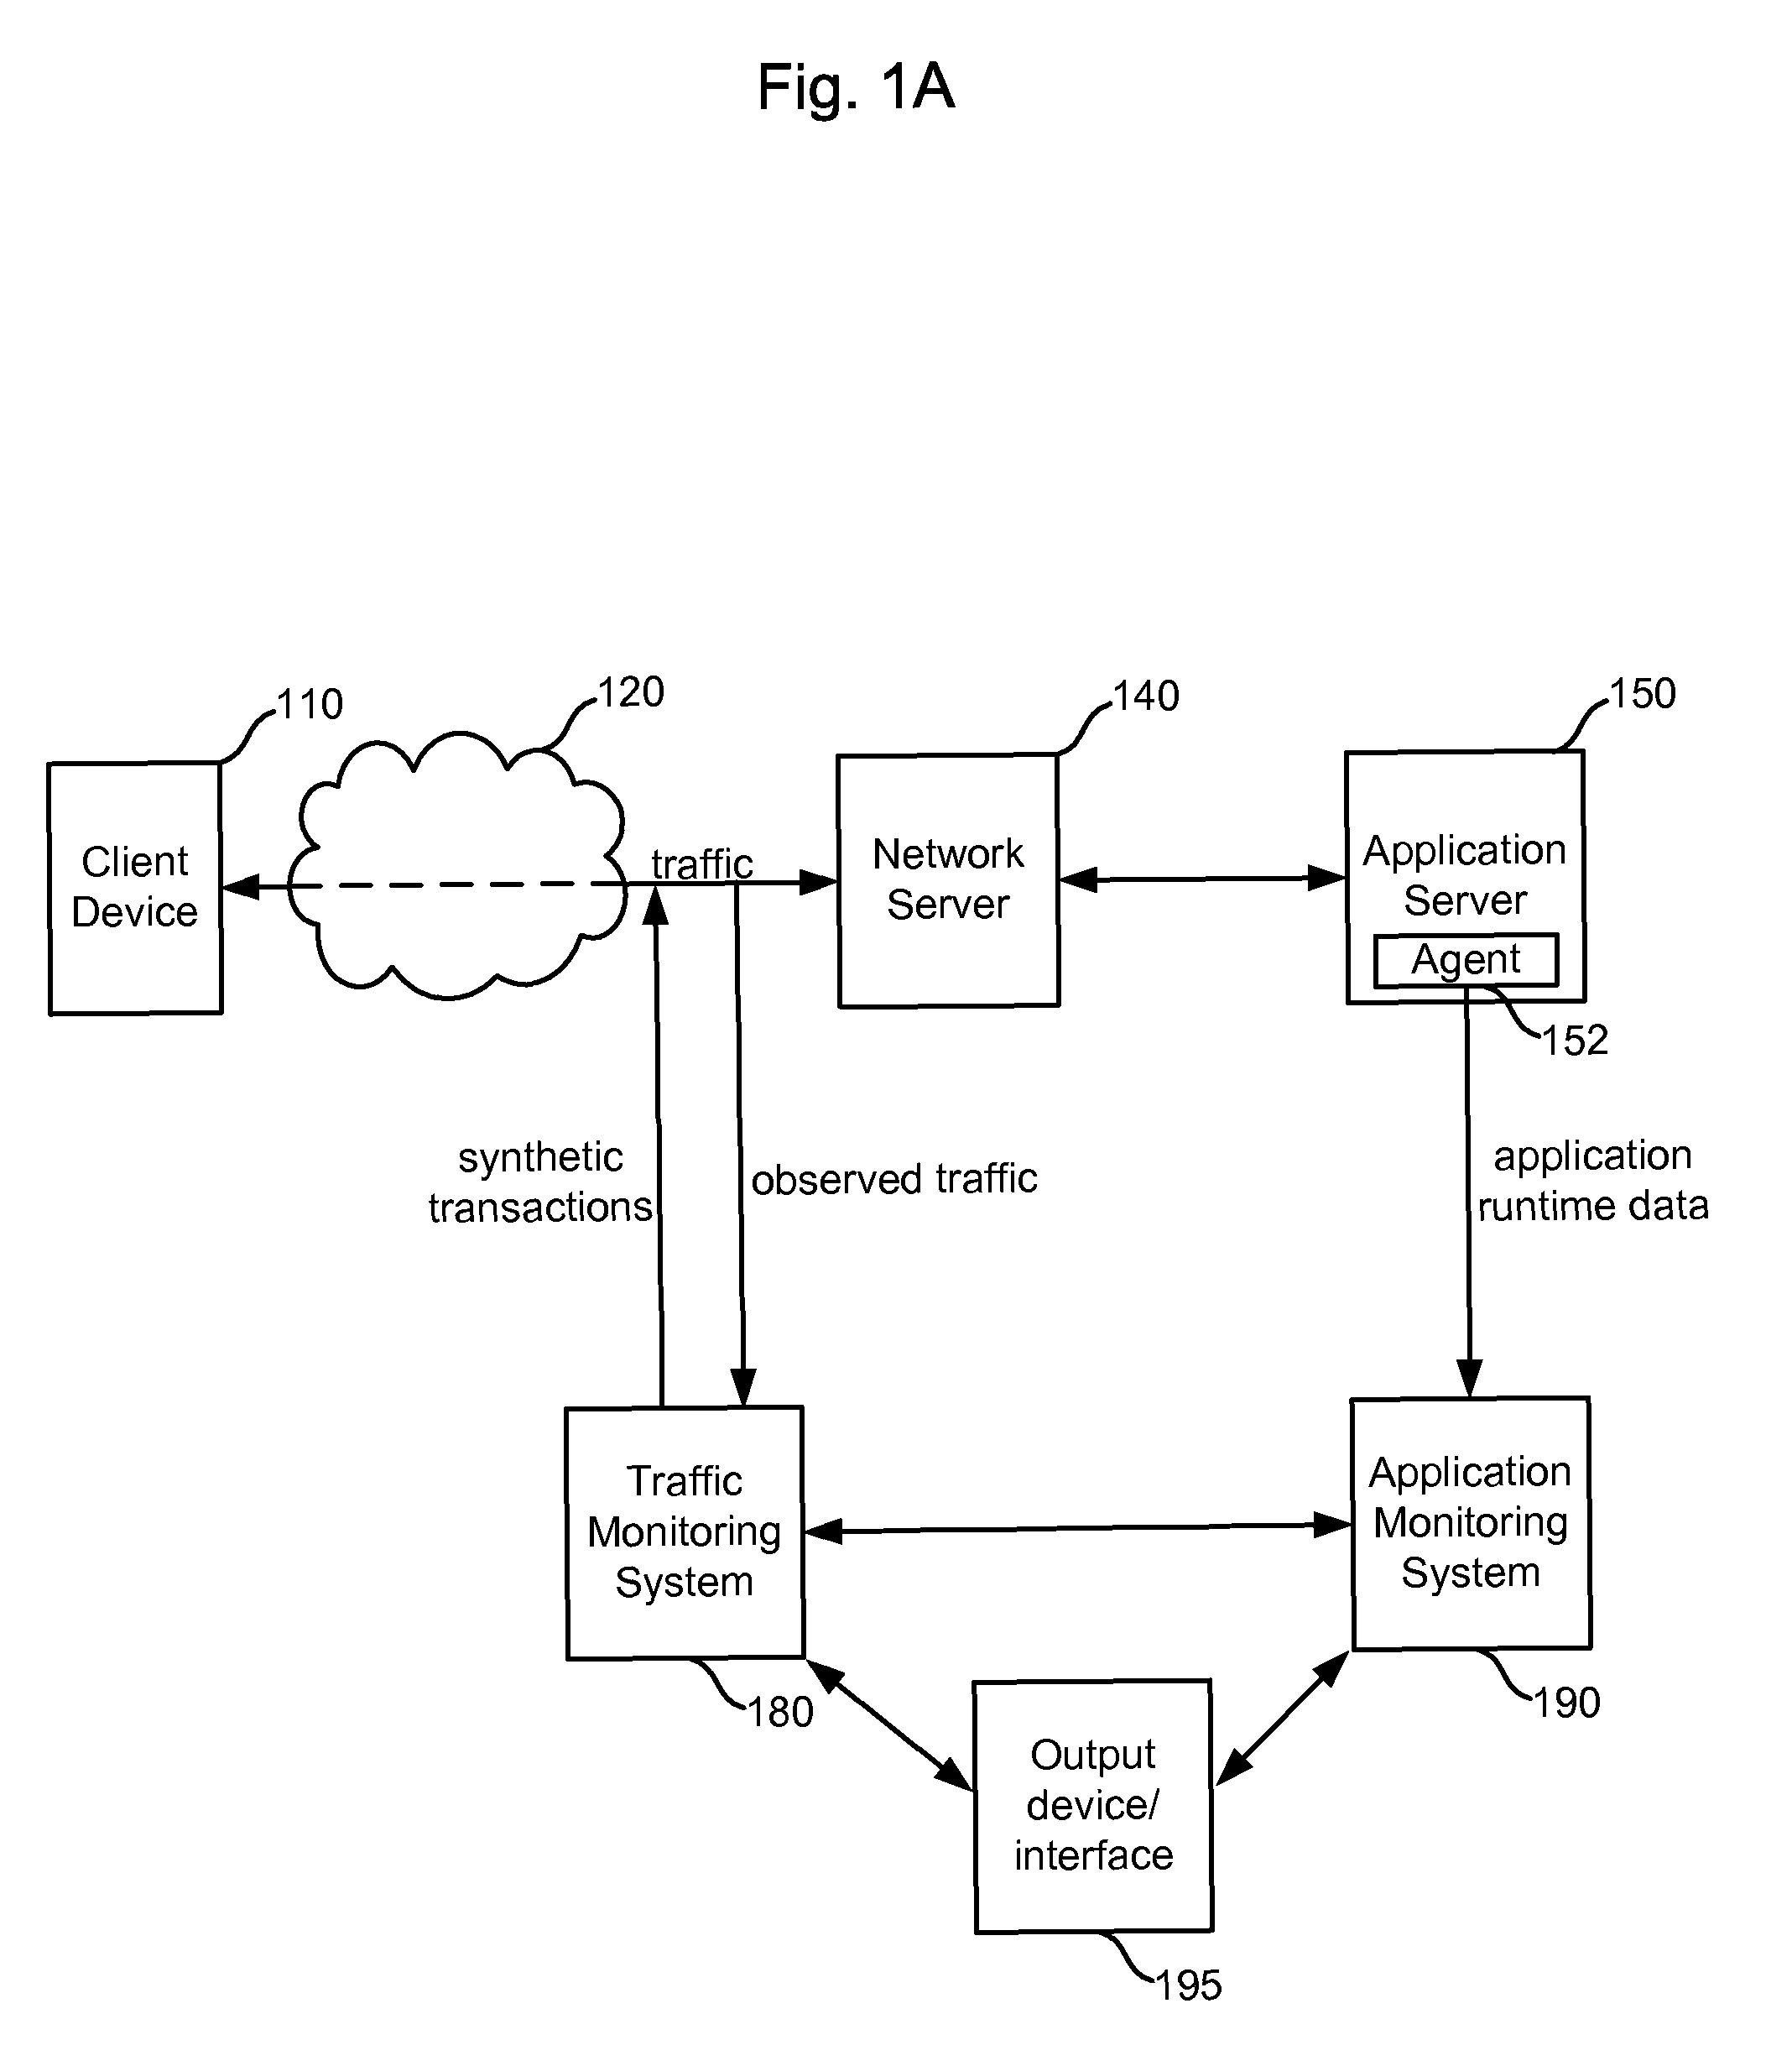 Hierarchy for characterizing interactions with an application